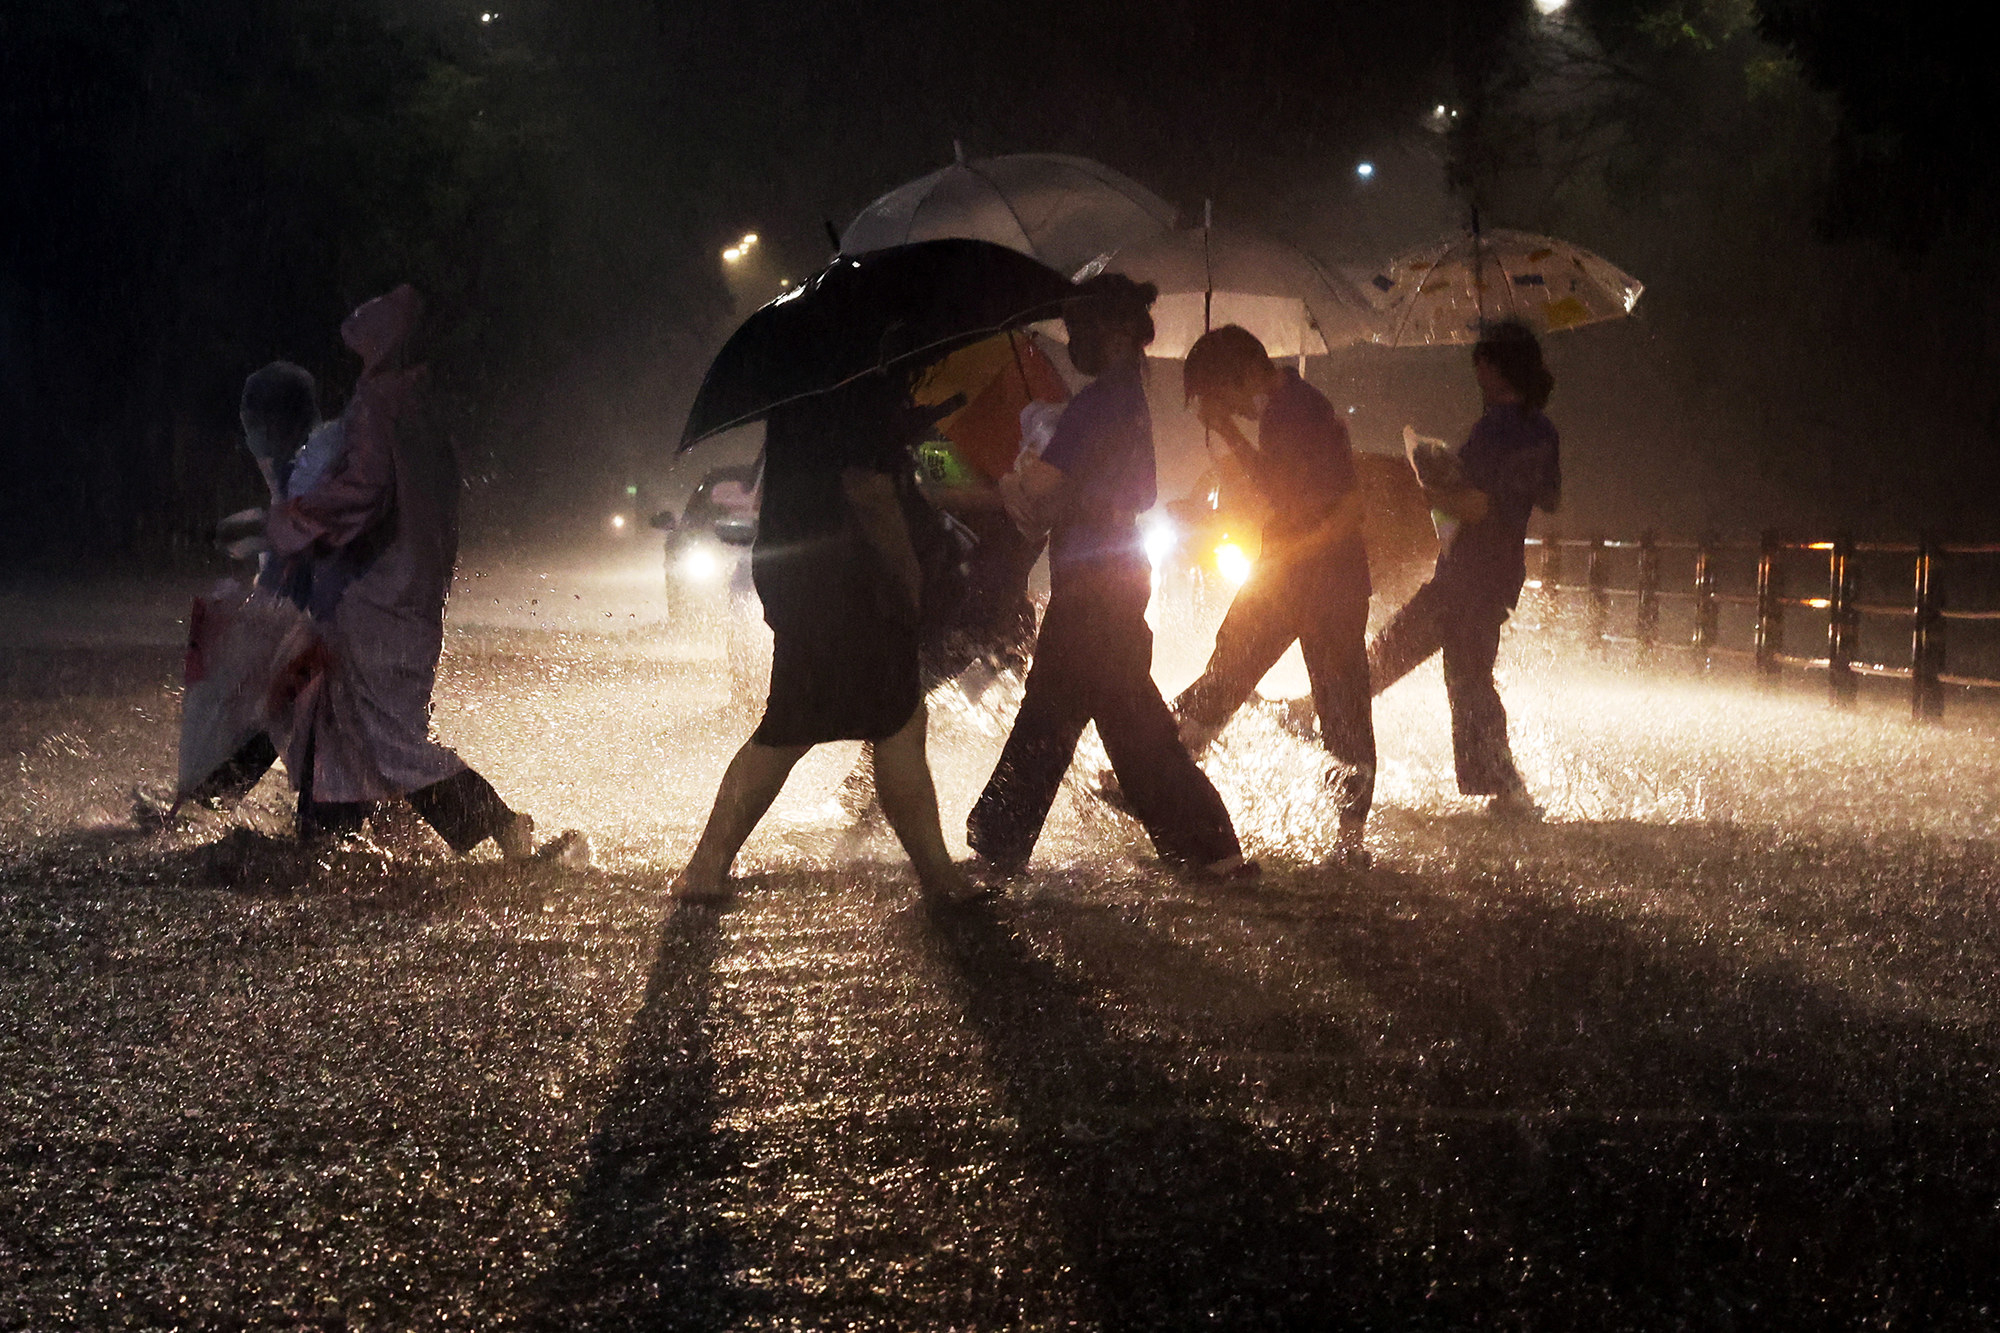 People wearing rain coats and holding umbrellas are silhouetted by car headlights as they cross a street in heavy rain